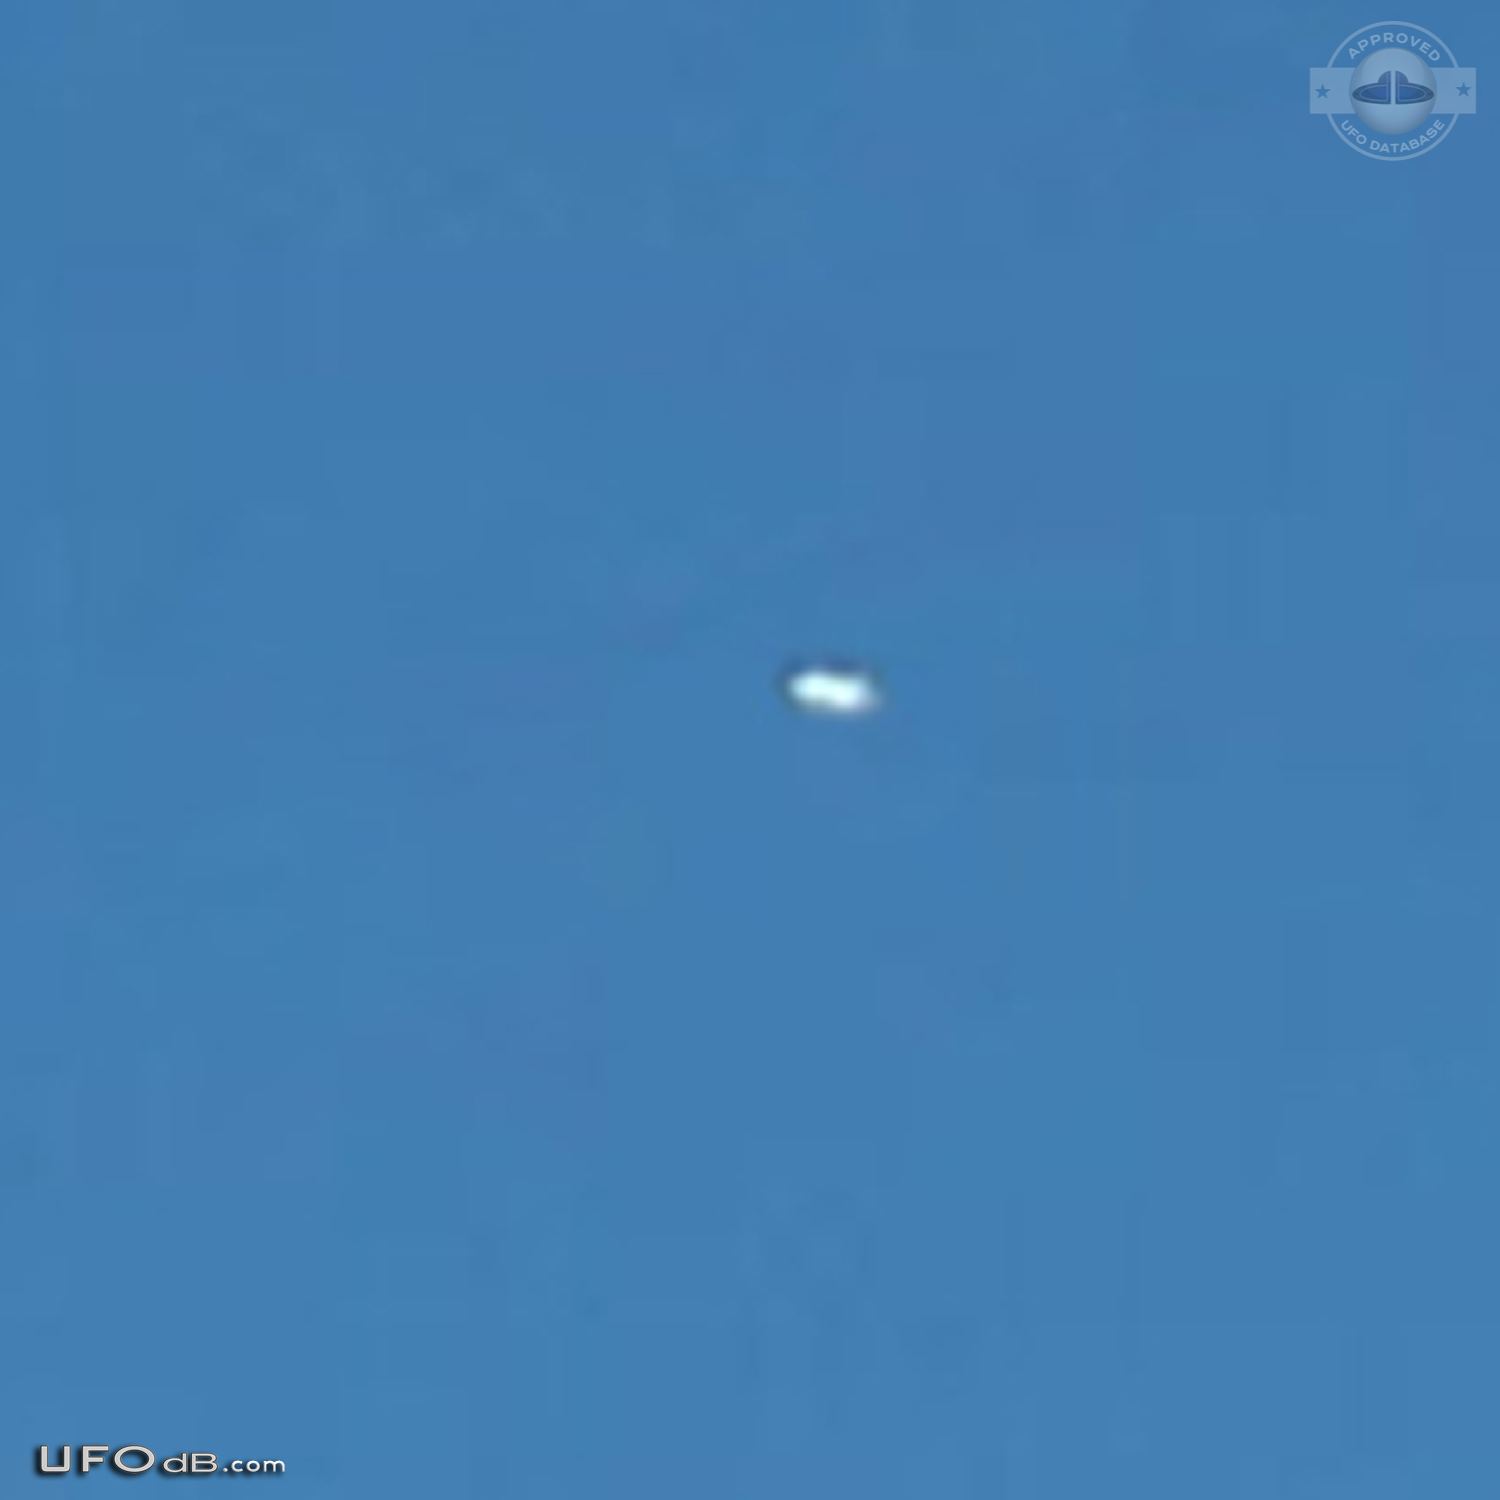 Cylindrical Saucer UFO caught on picture over Oland, Sweden in 2008 UFO Picture #453-3